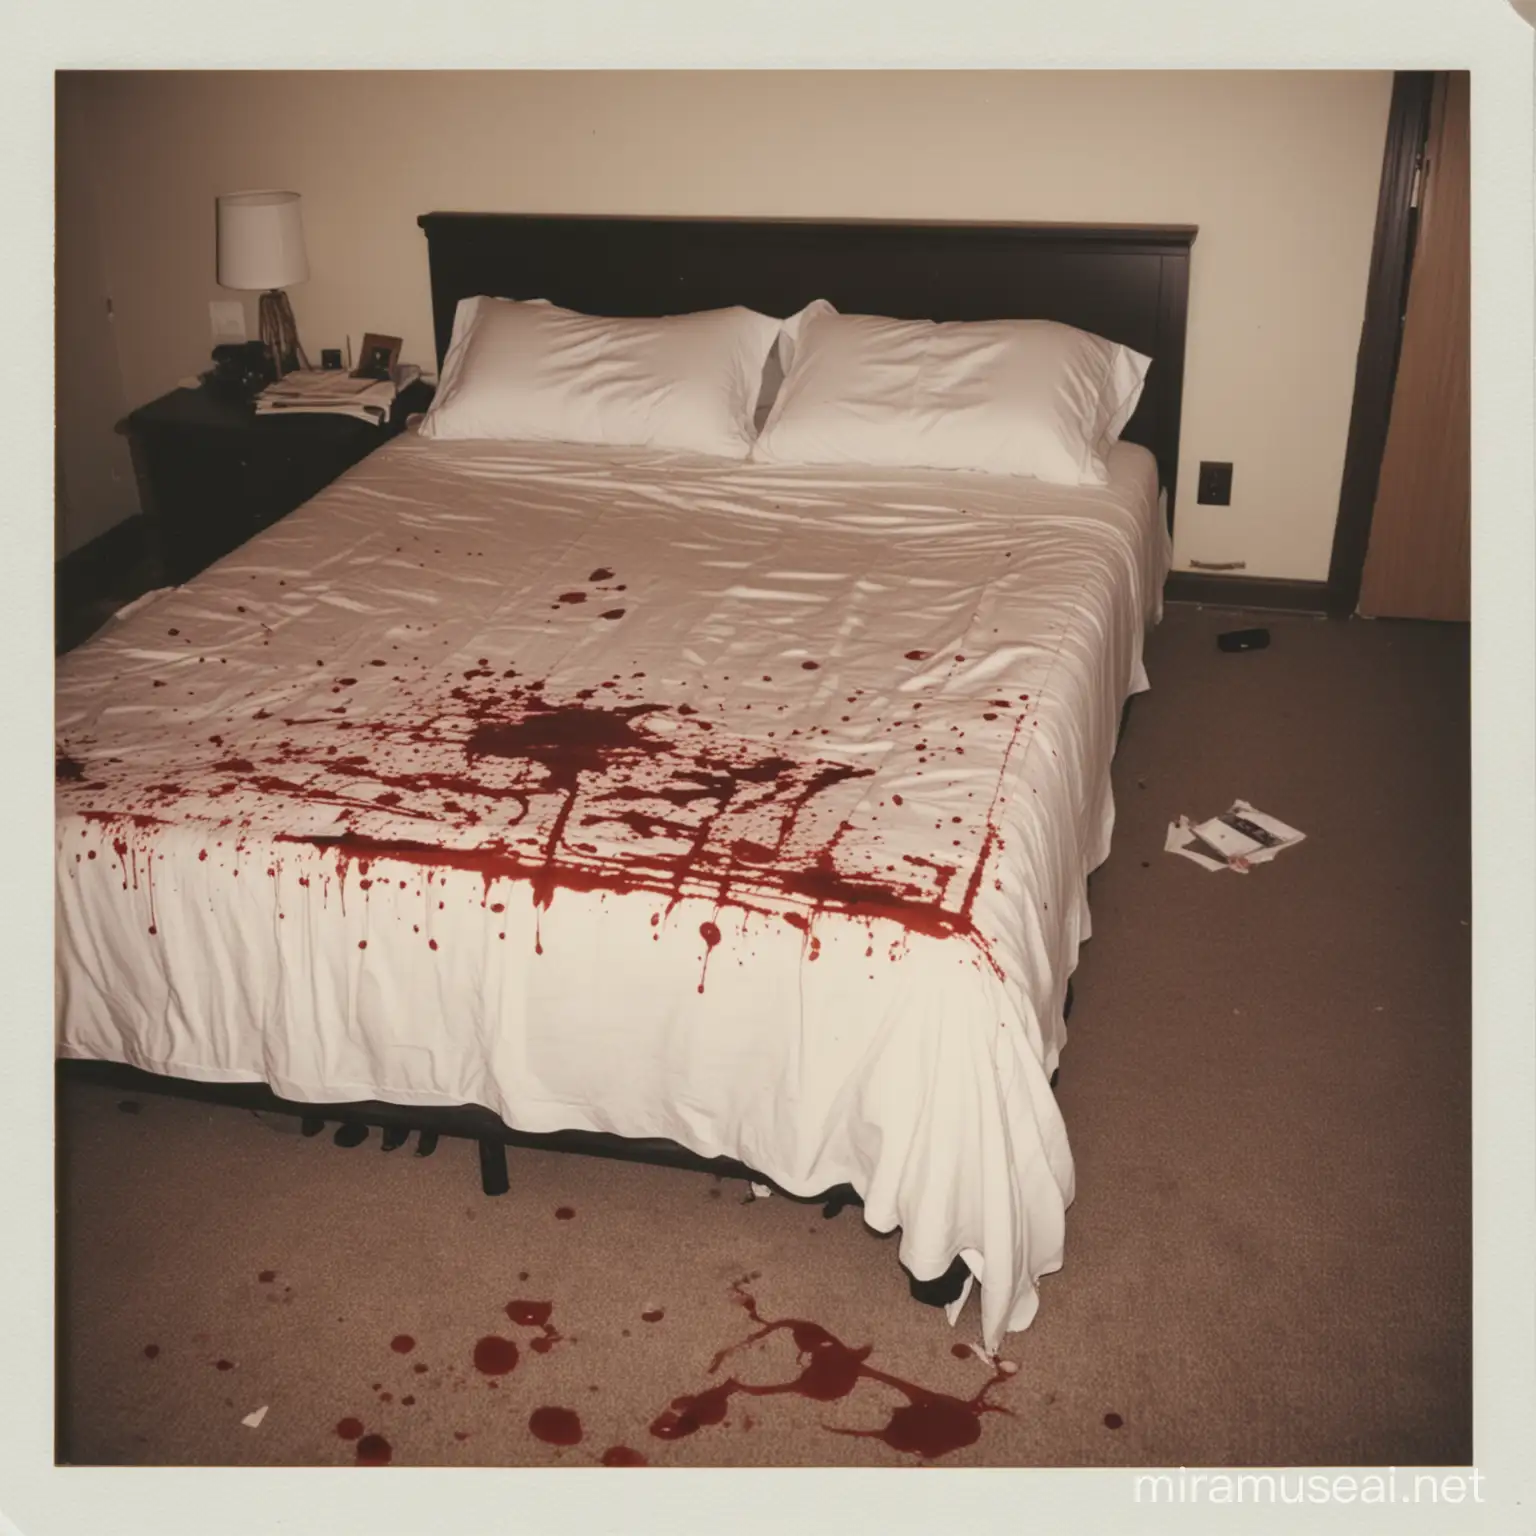 A polaroid photo of a bed with blood stains on it and the blanket, crime scene, 1993